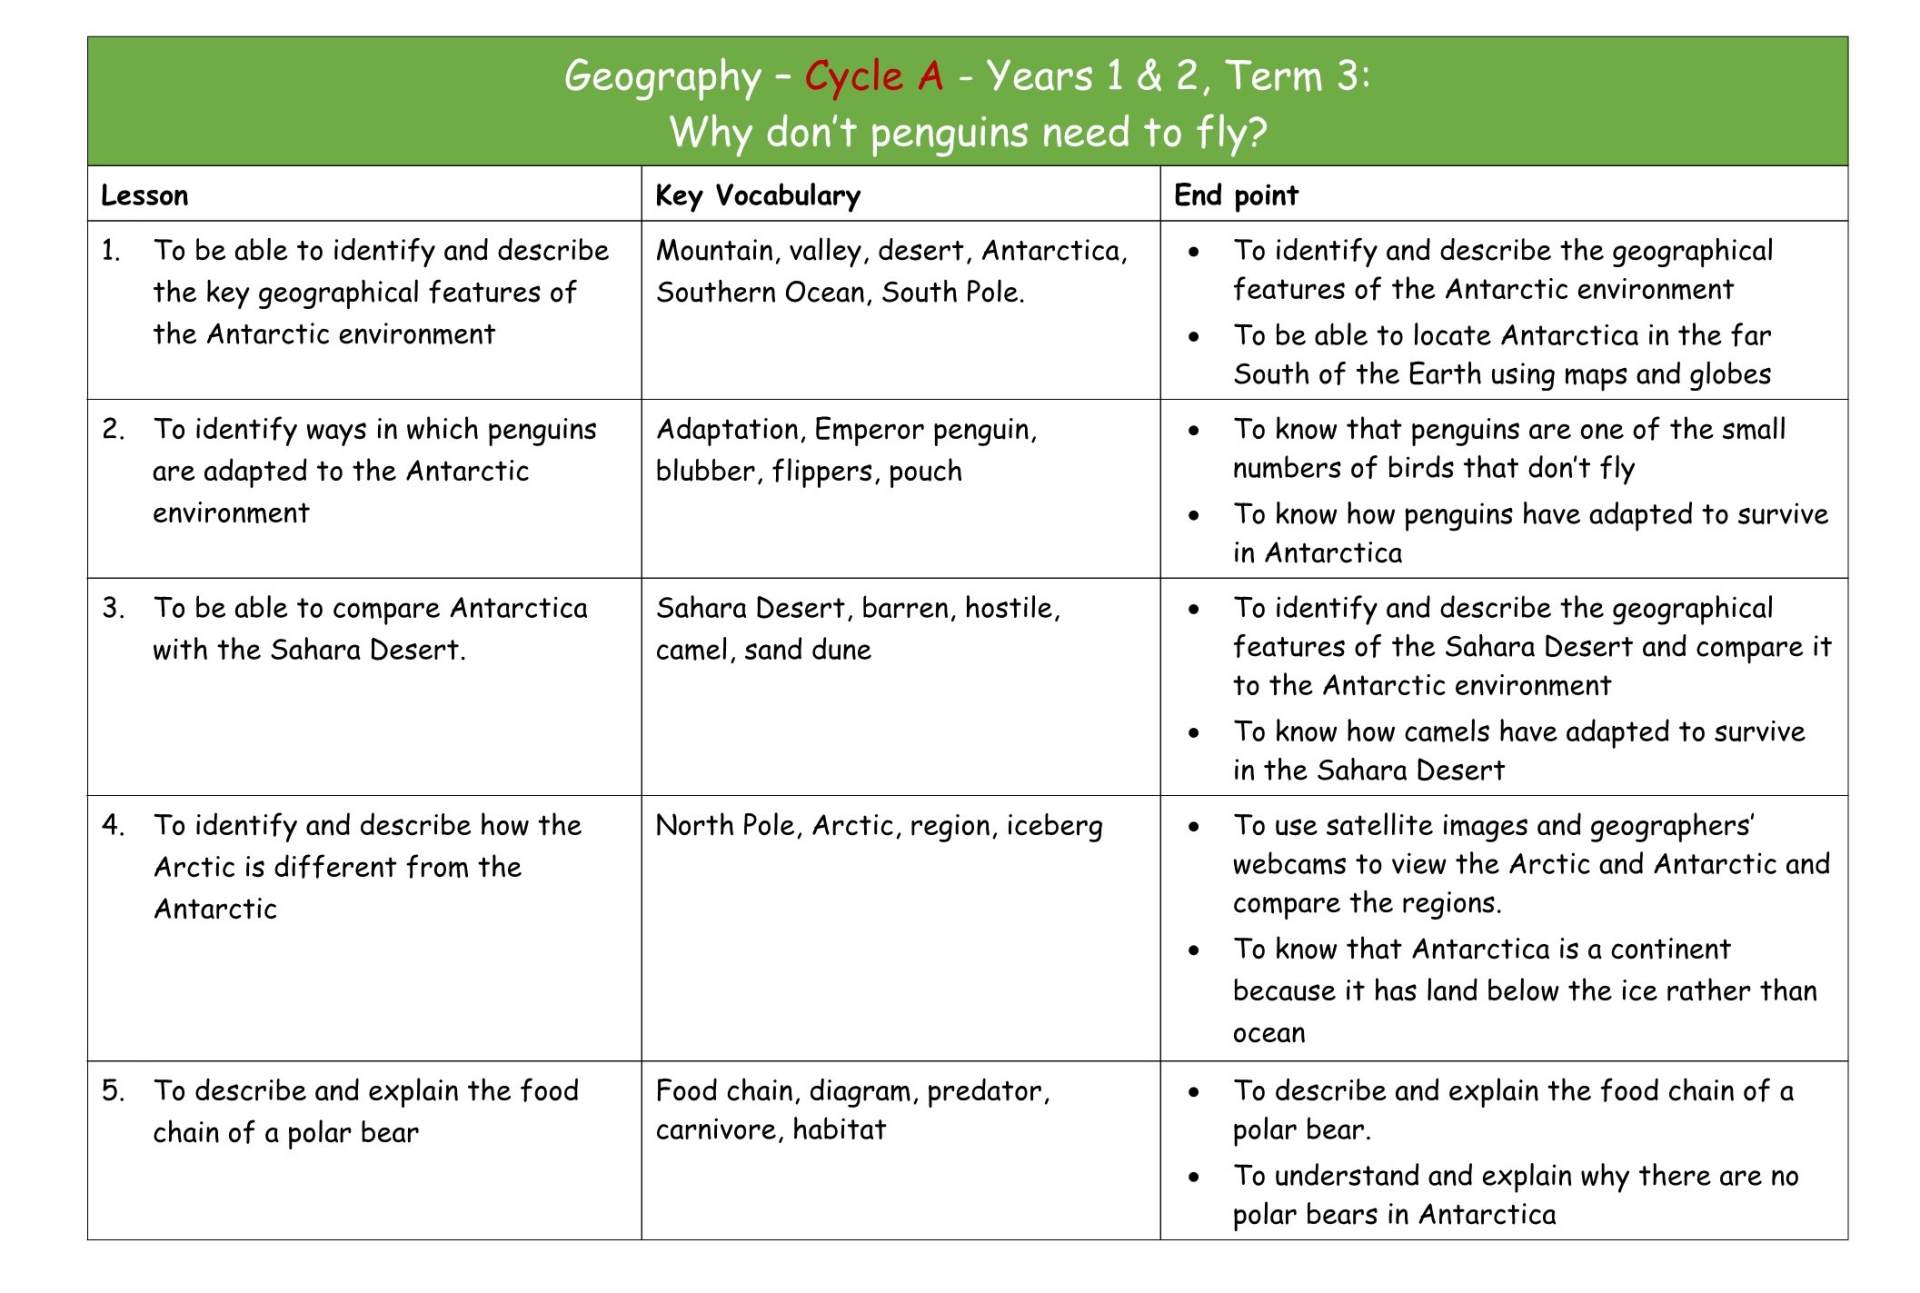 Geography Y 1&2 Cycle A MTP T3